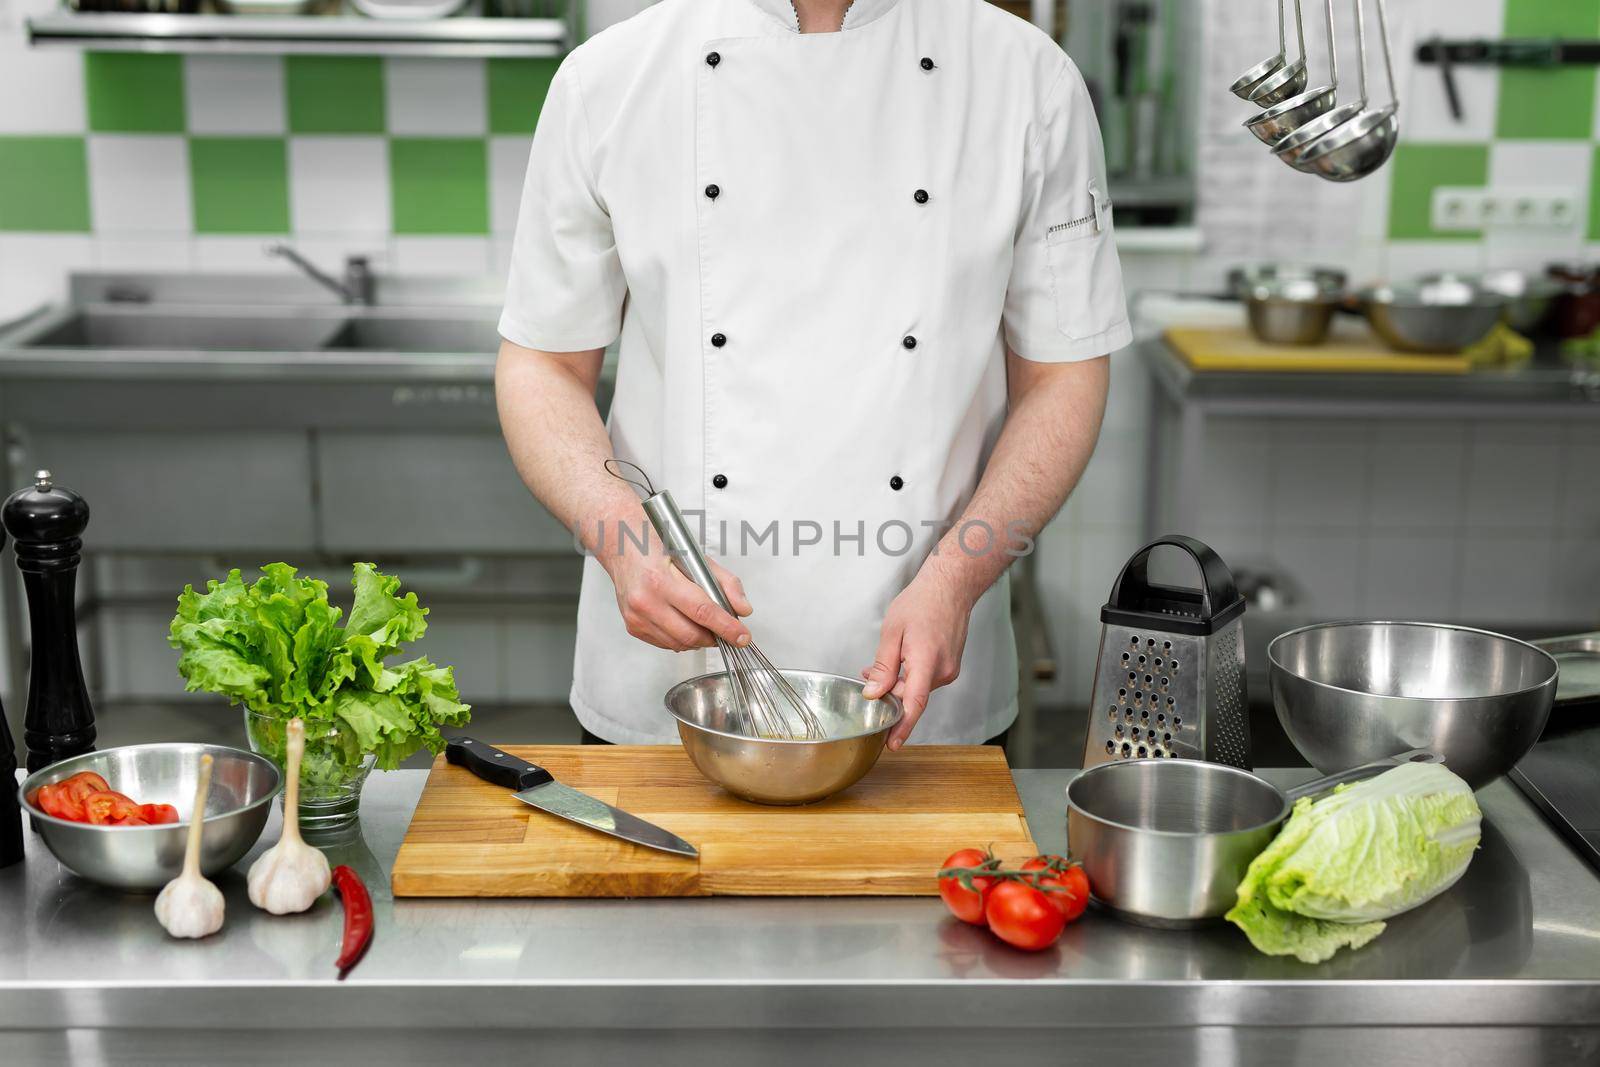 Chef whips eggs with his hands in a bowl to make an omelet with vegetables